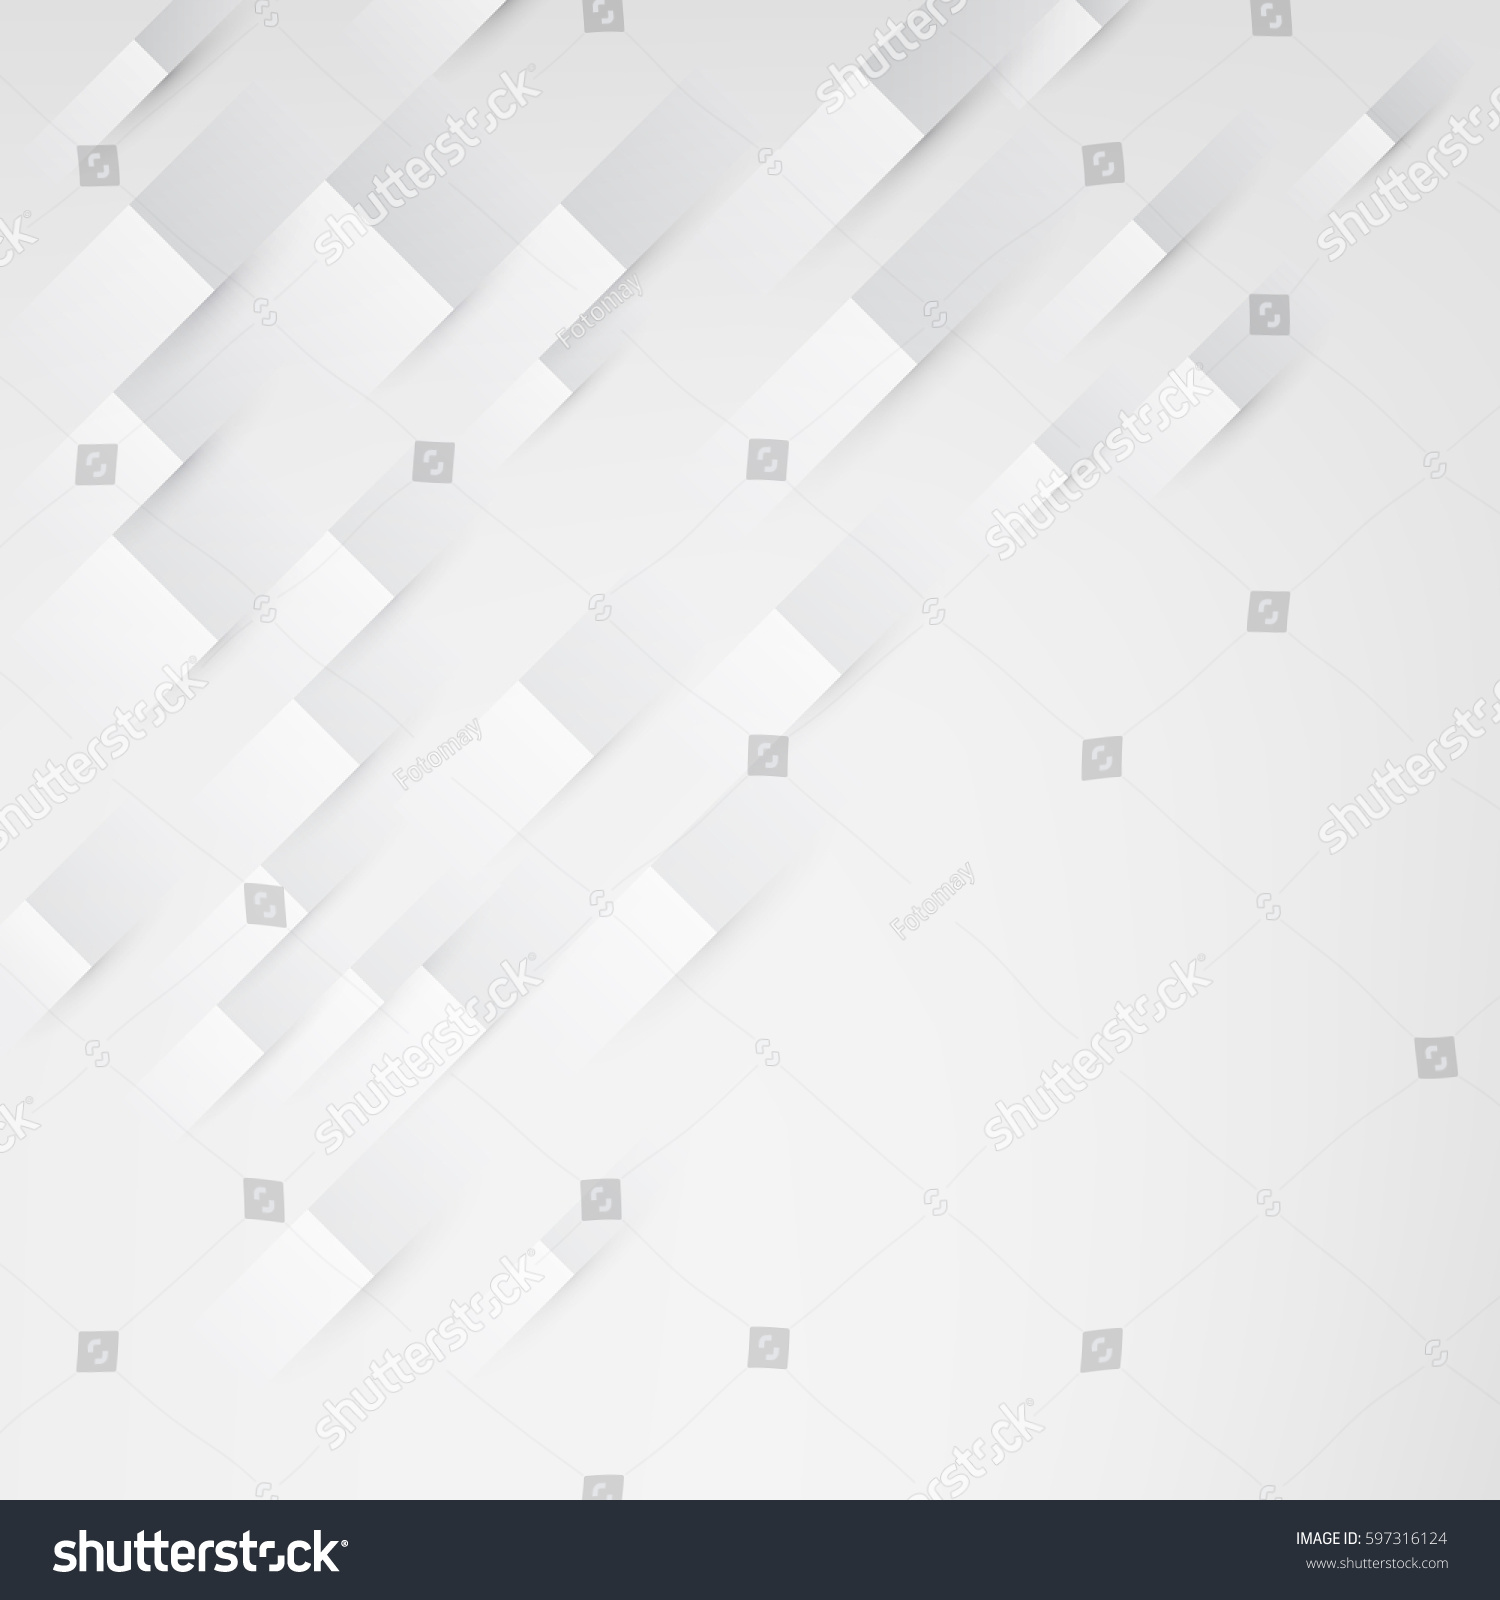 Vector Geometric Abstract Background Be Used Stock Vector (Royalty Free ...